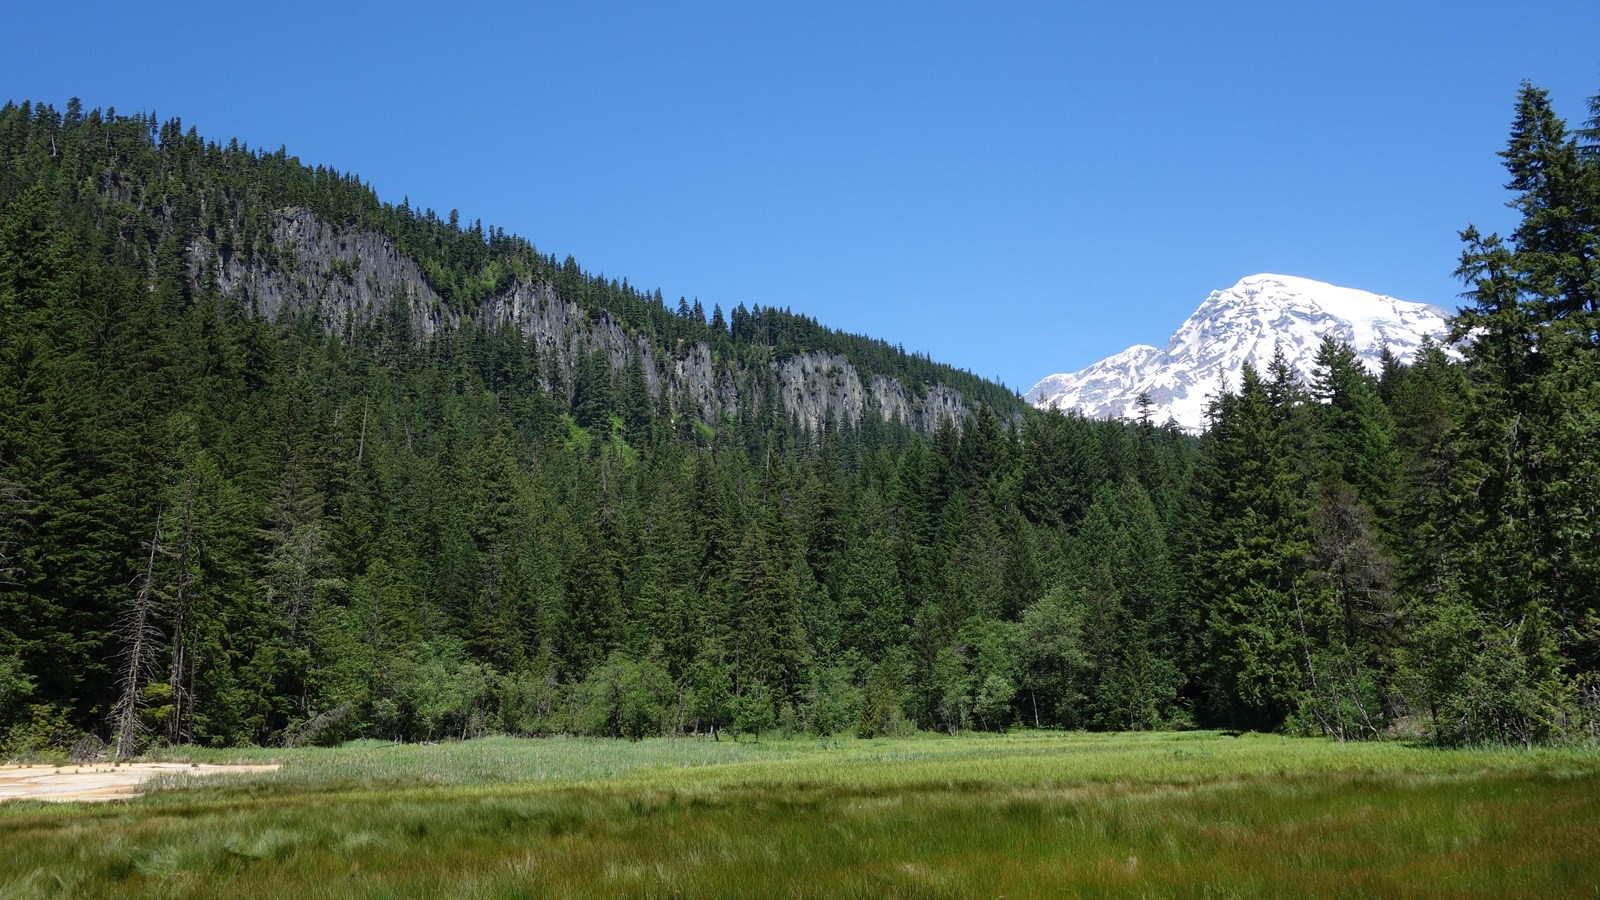 A glaciated mountain peak rises above a forested ridge and grassy meadow.